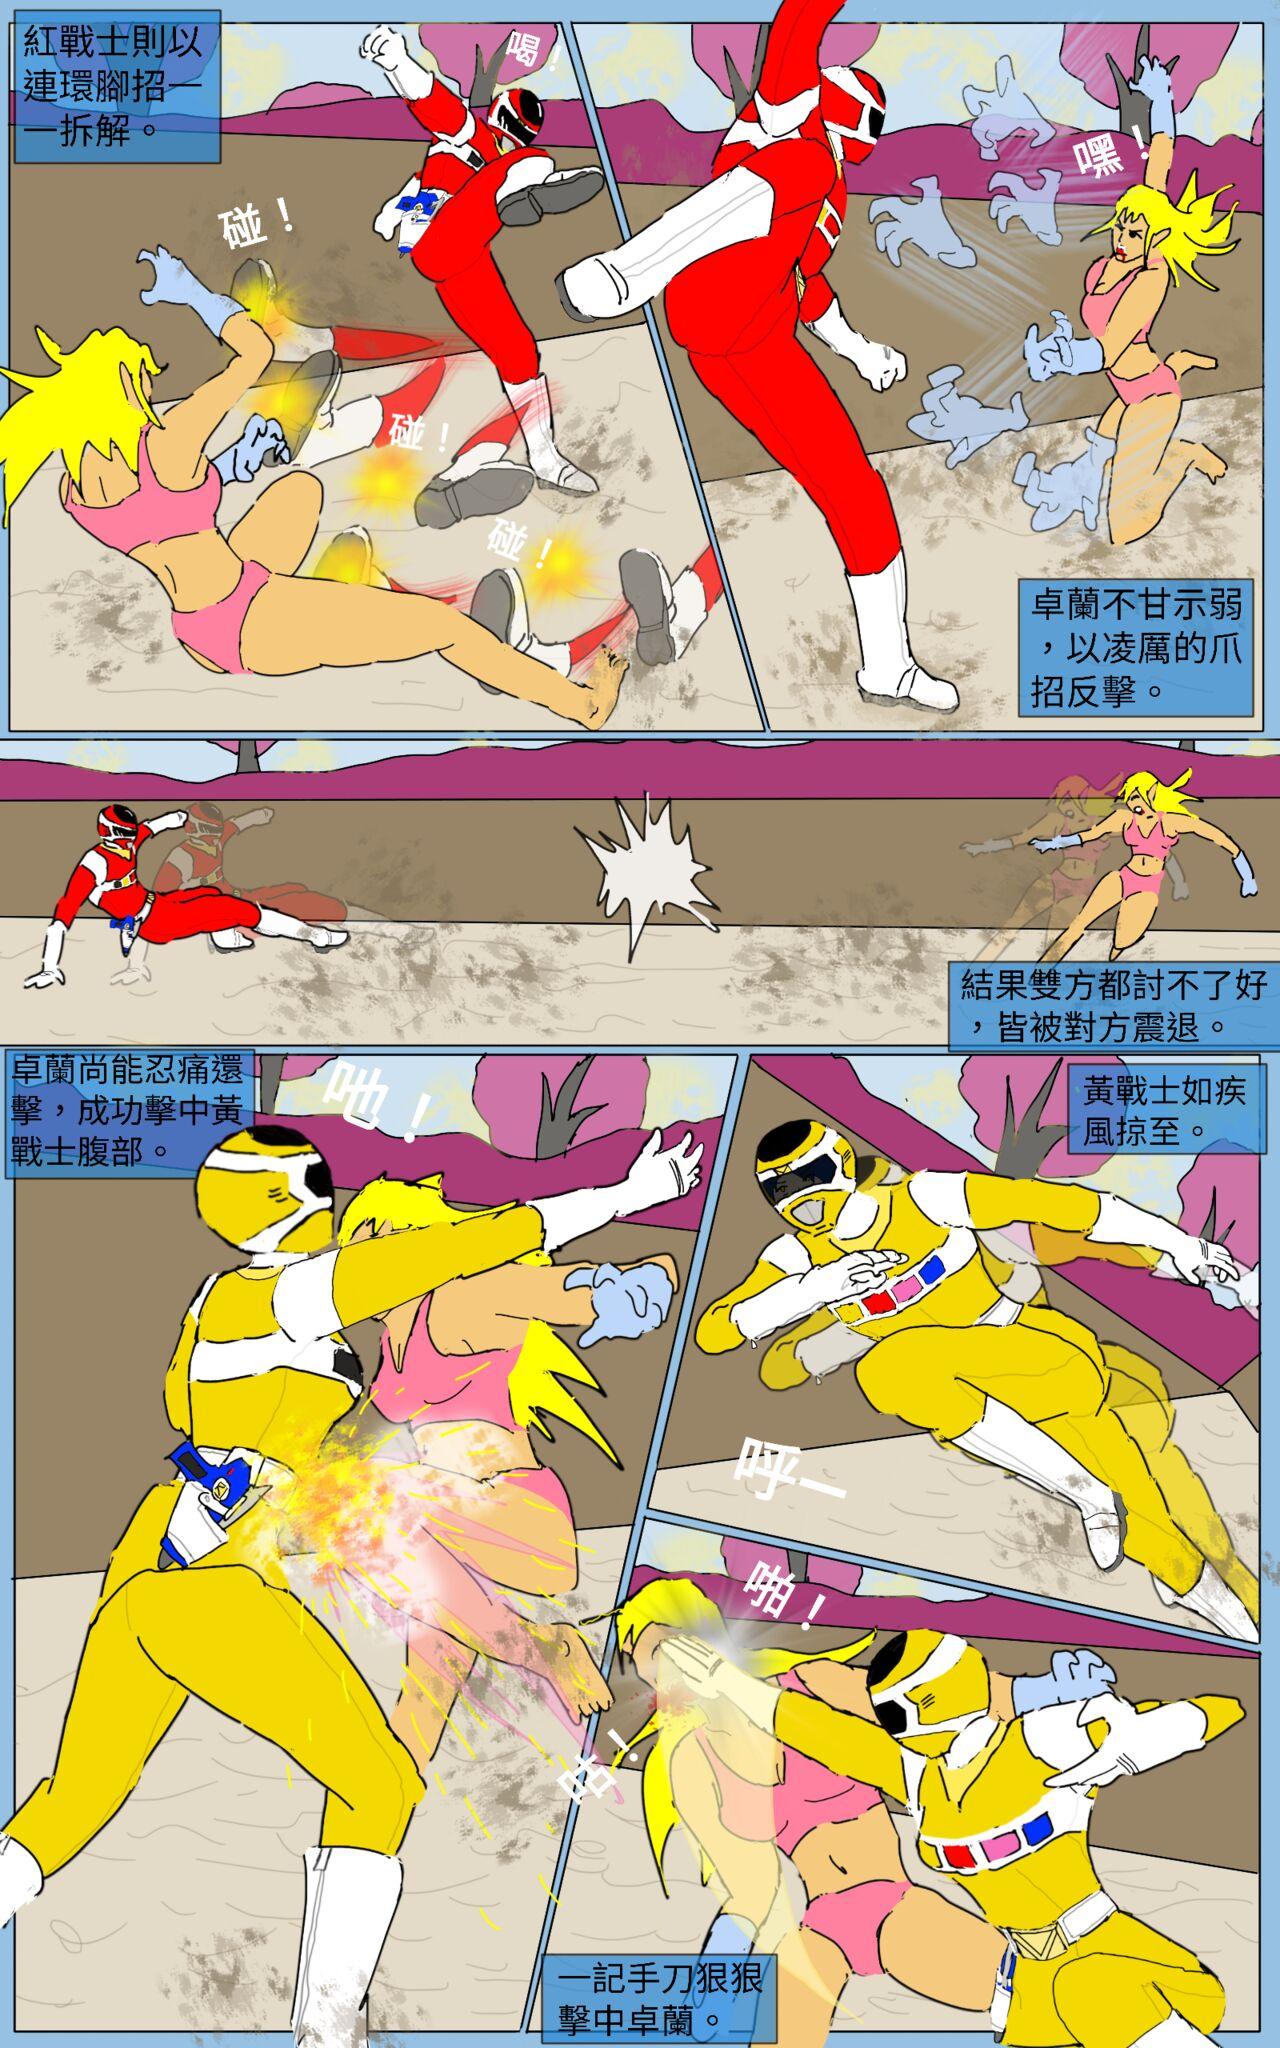 Pussy Eating Mission 29 - Super sentai Gaping - Page 2